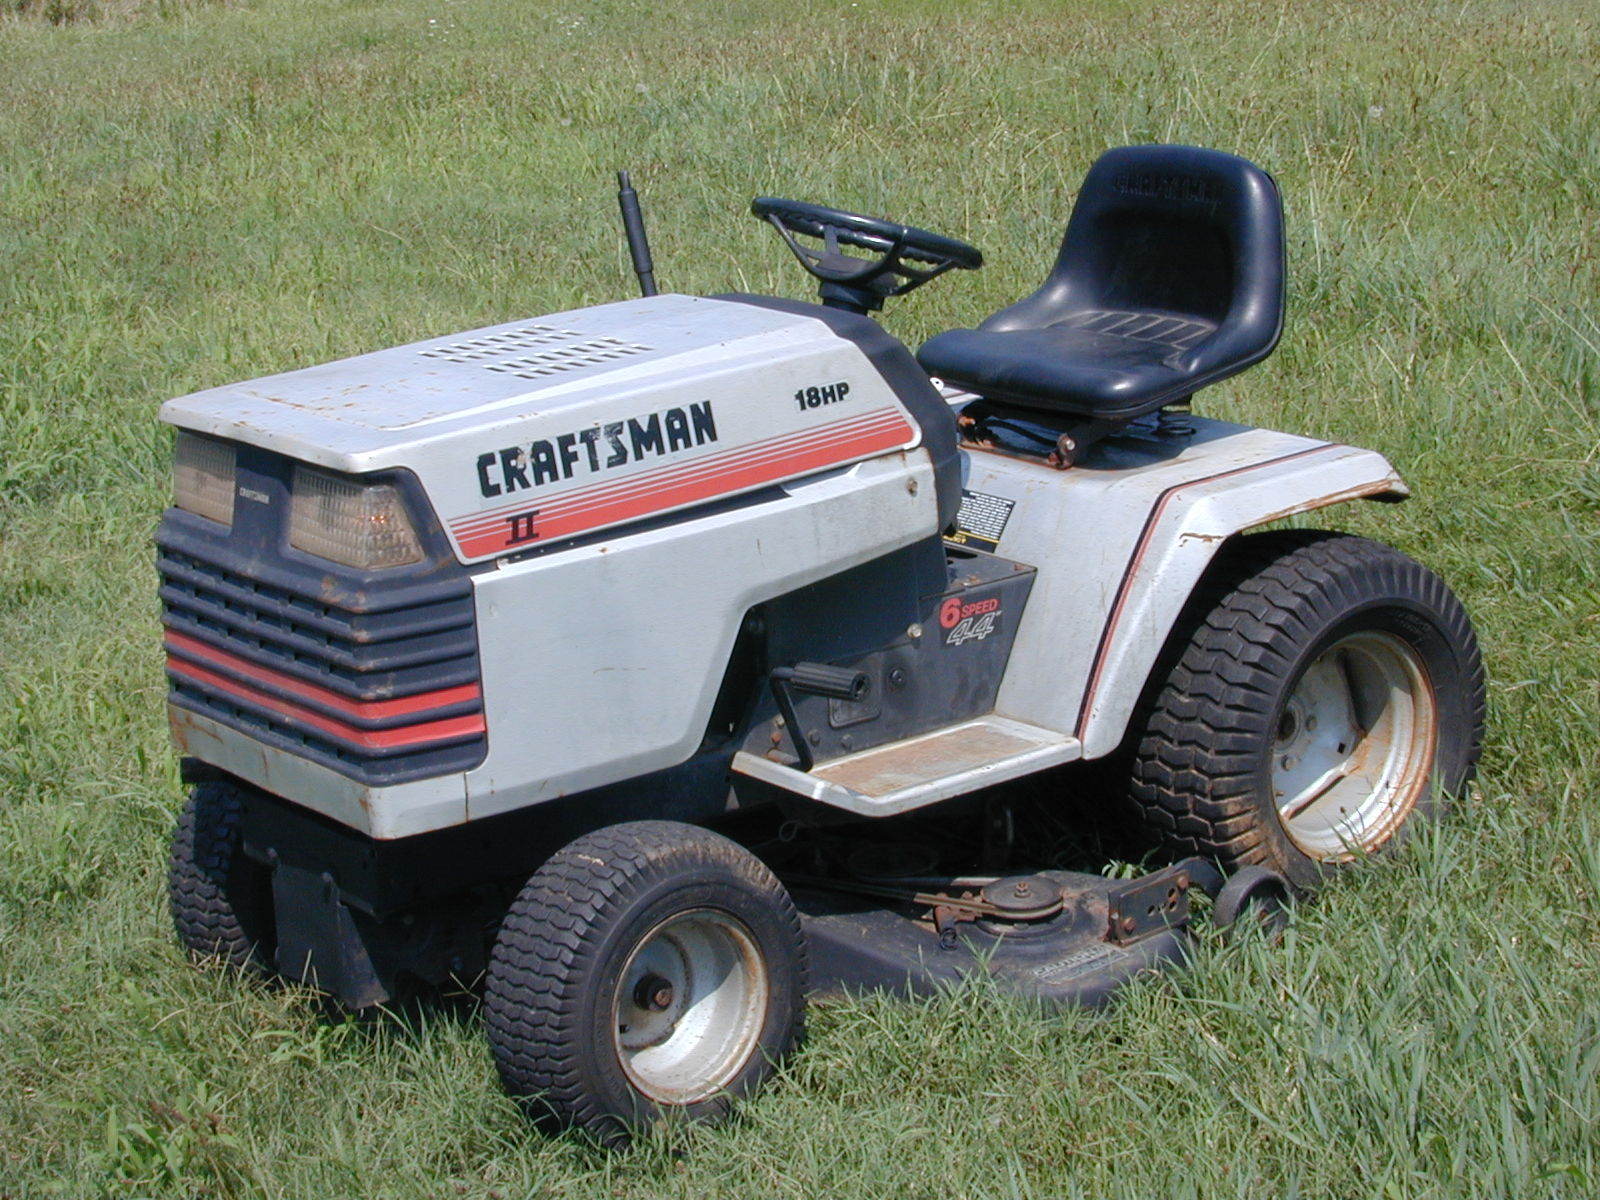 Craftsman Riding Tractor Model 502256110 Pictures to pin on Pinterest